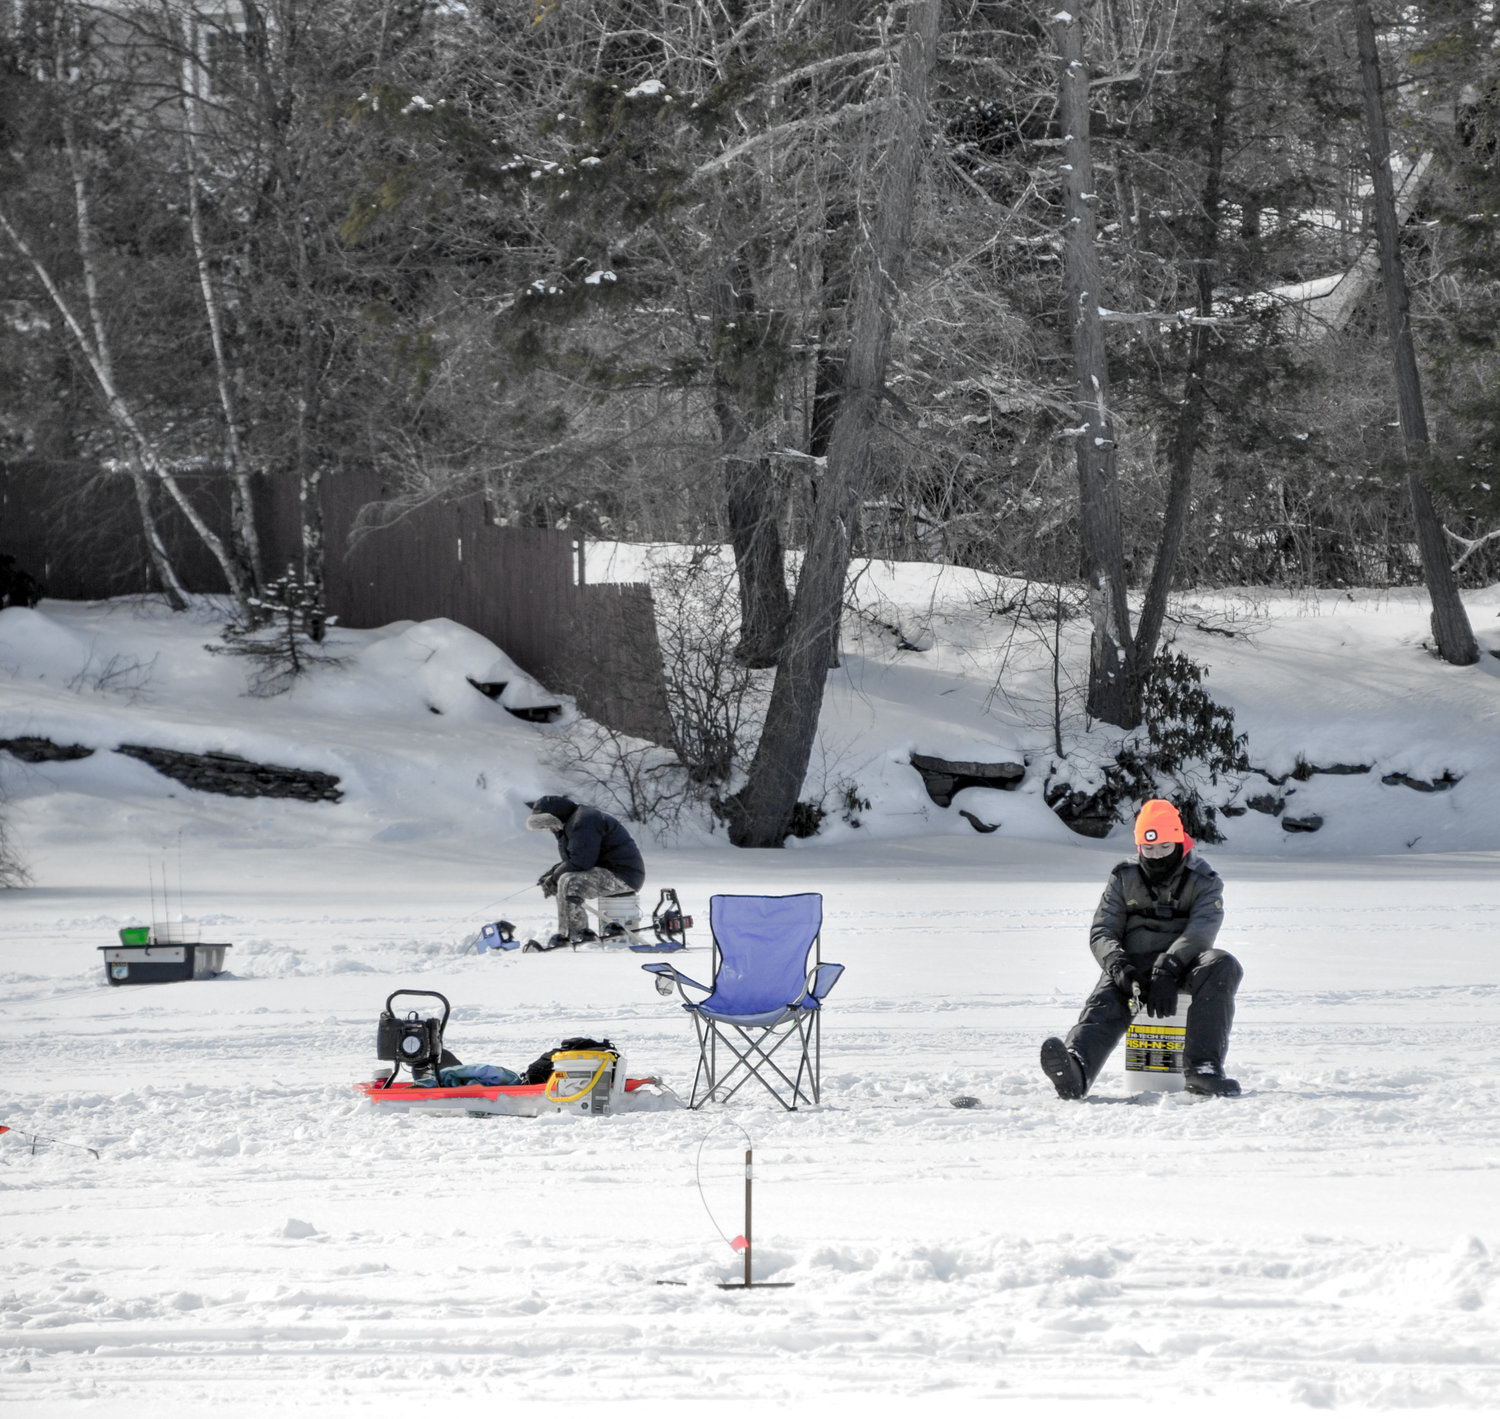 More than 400 folks showed up for the 2021 King of the Ice tournament, fishing alone or in groups, at Bethel, NY last Sunday, raising money for the Sullivan County Conservation Club.